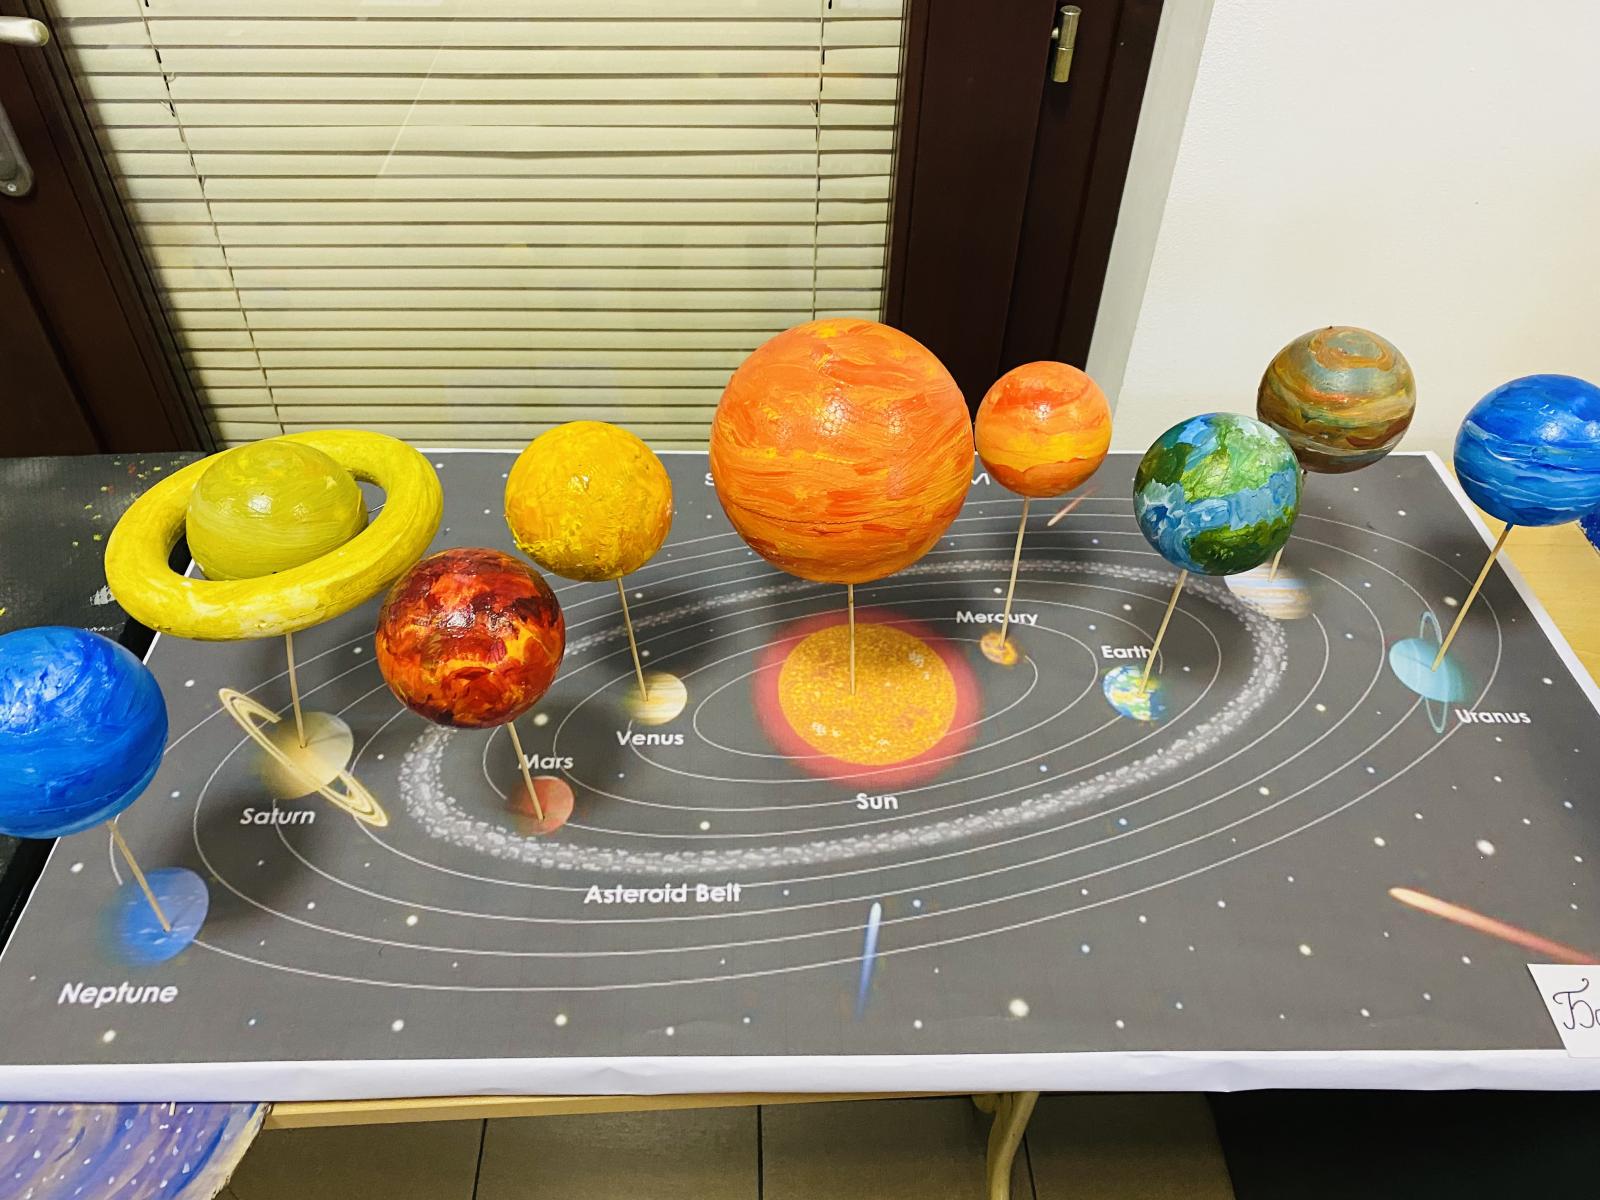 my solar system project